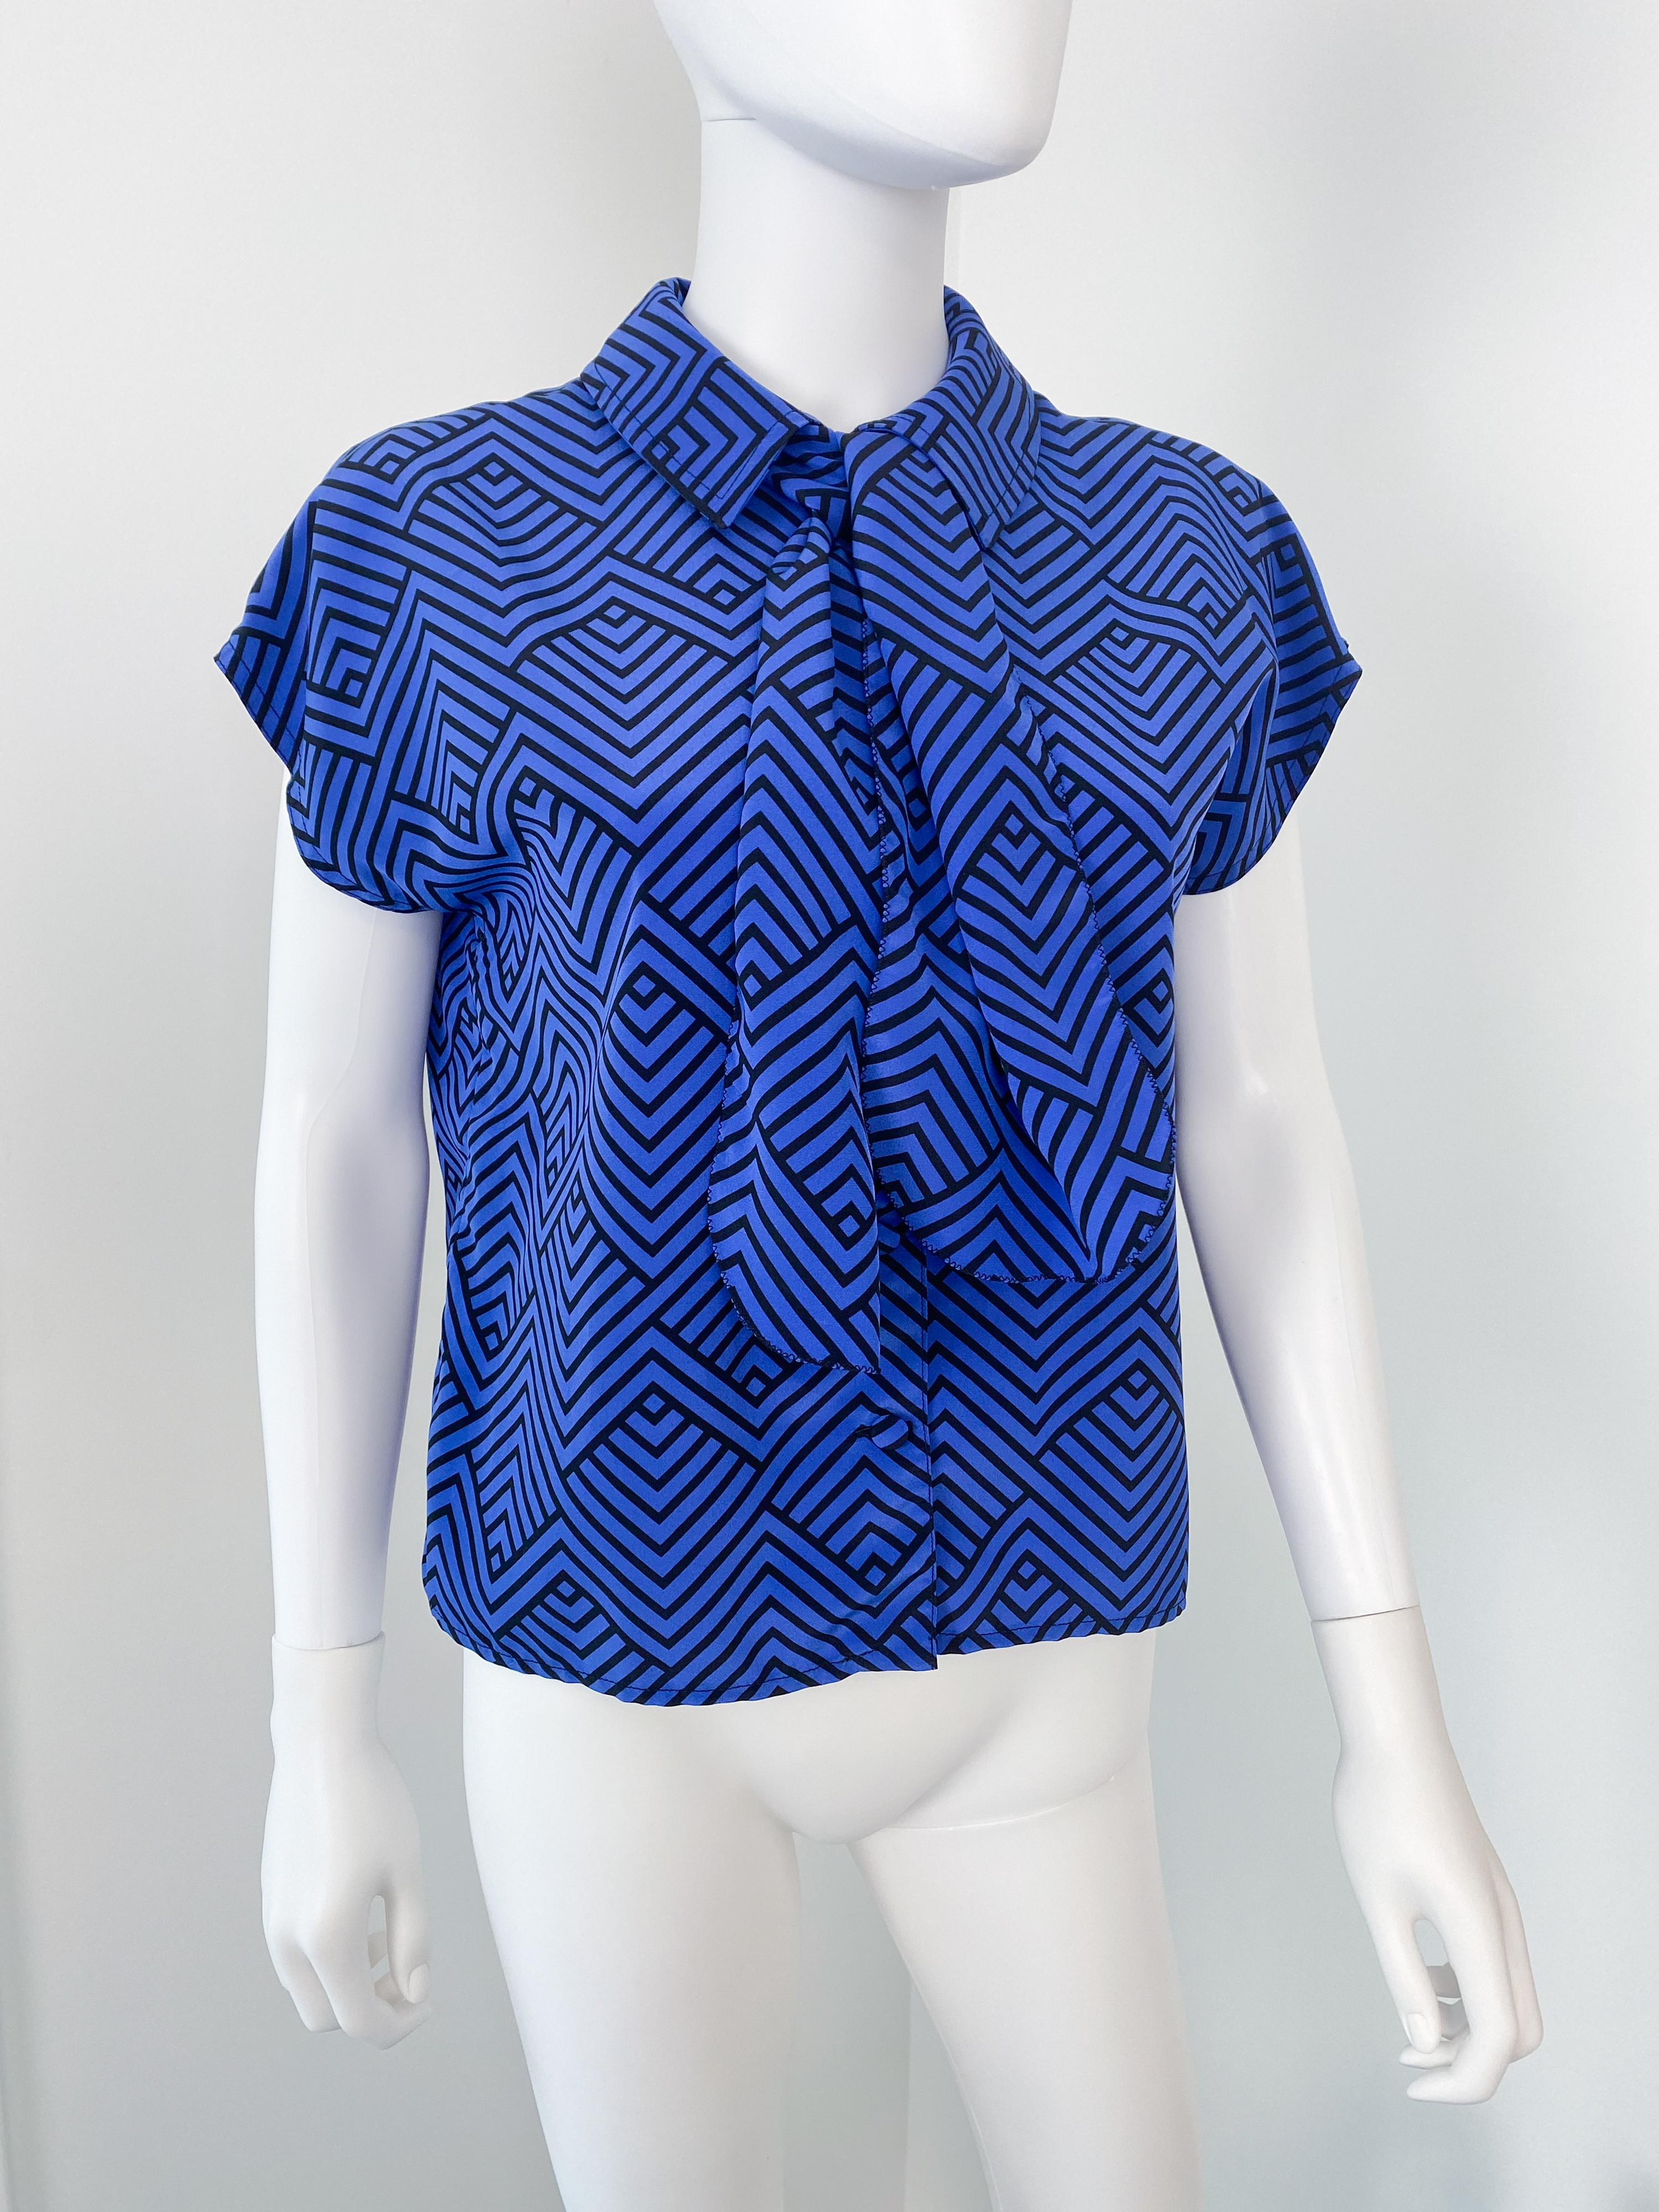 Women's or Men's Vintage 1980s Silky Polyester Blouse Top Black and Blue ZigZag Size 8/10 For Sale